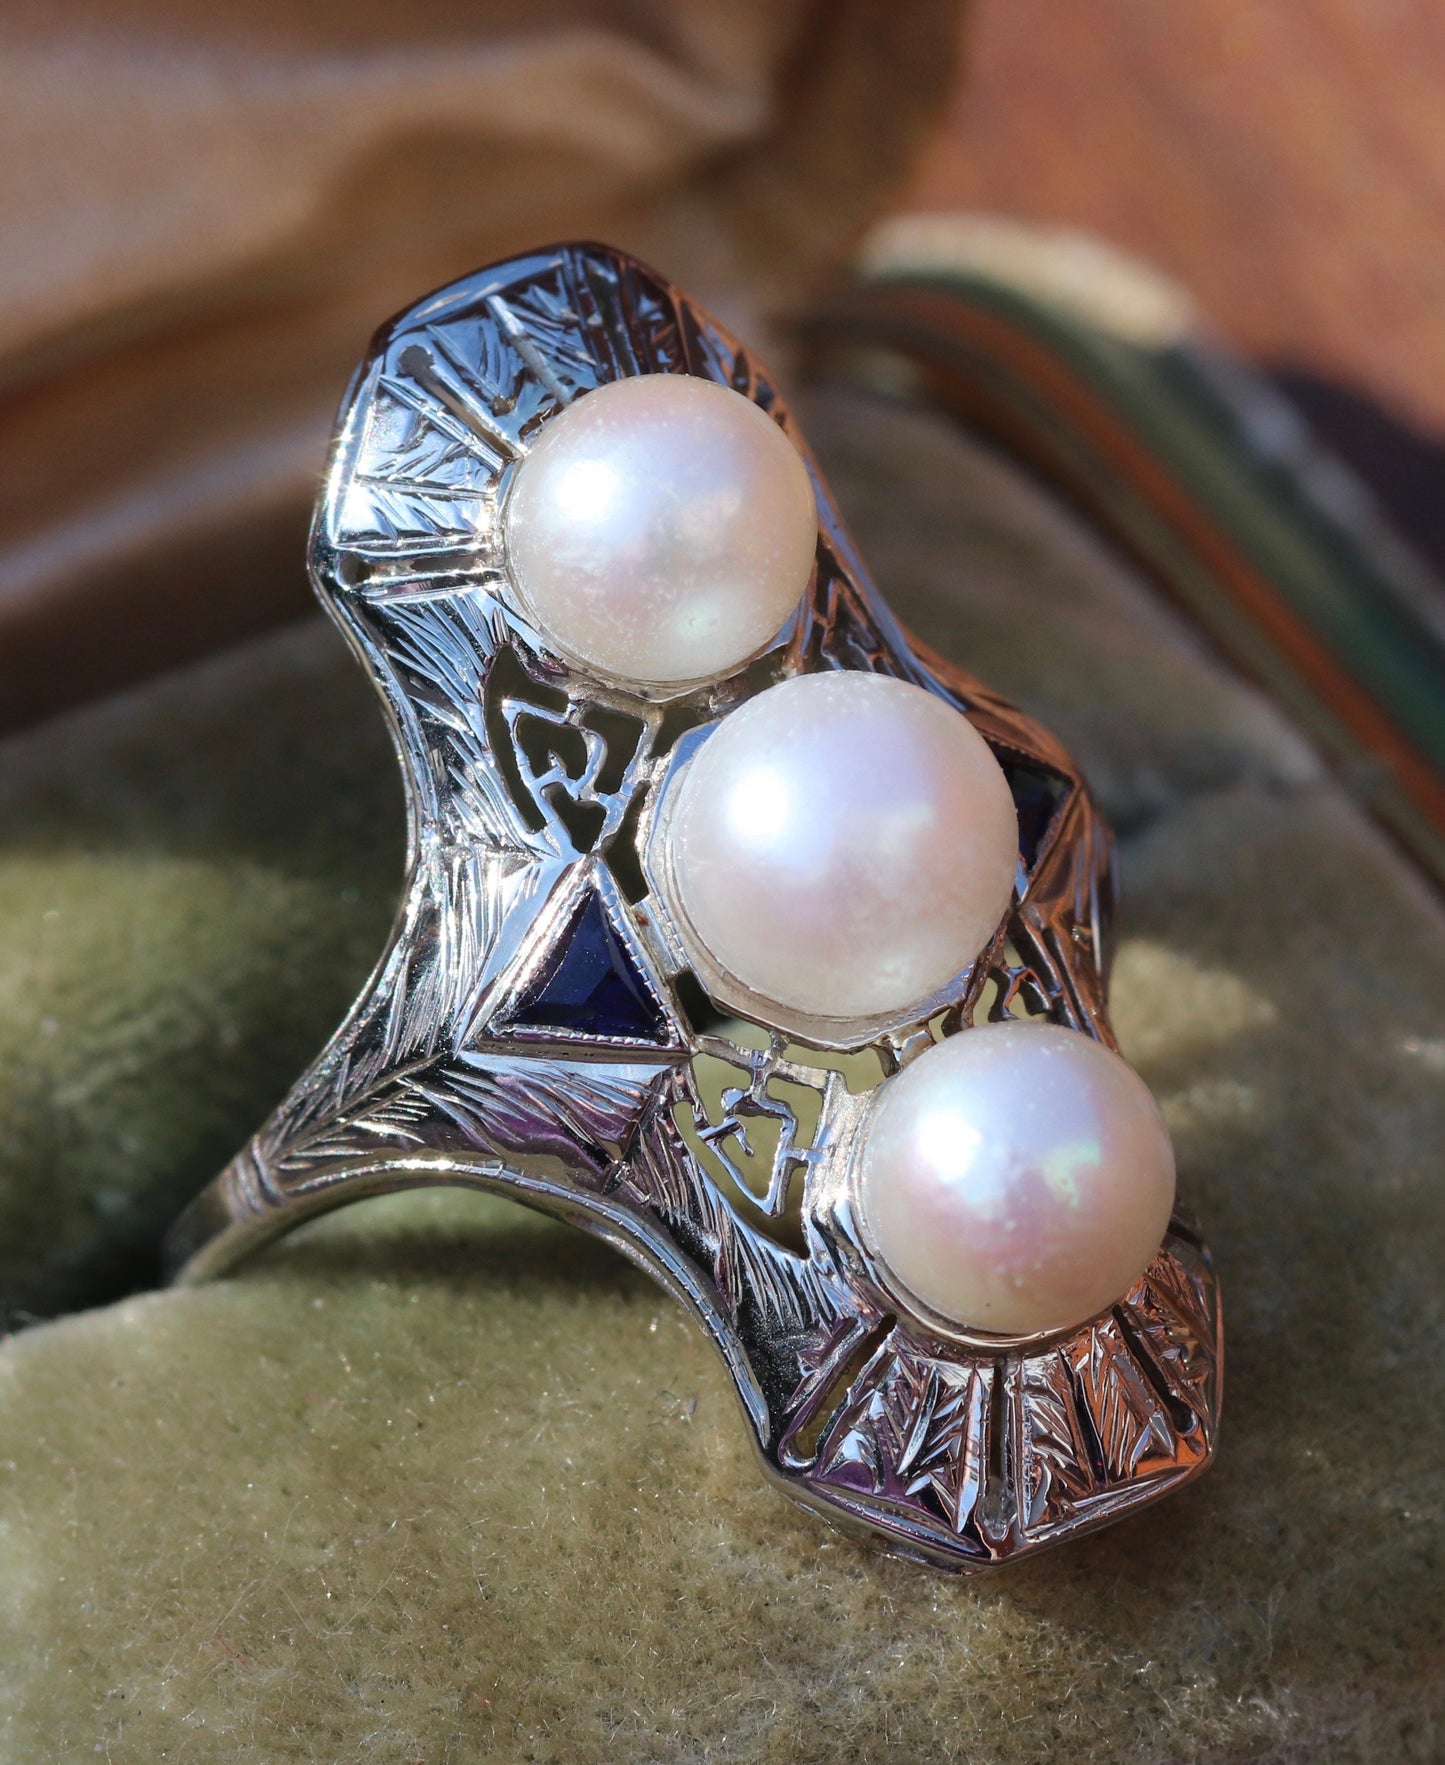 Saltwater pearl and synthetic sapphire Edwardian ring in 18k white gold size 8.5 (sizable)